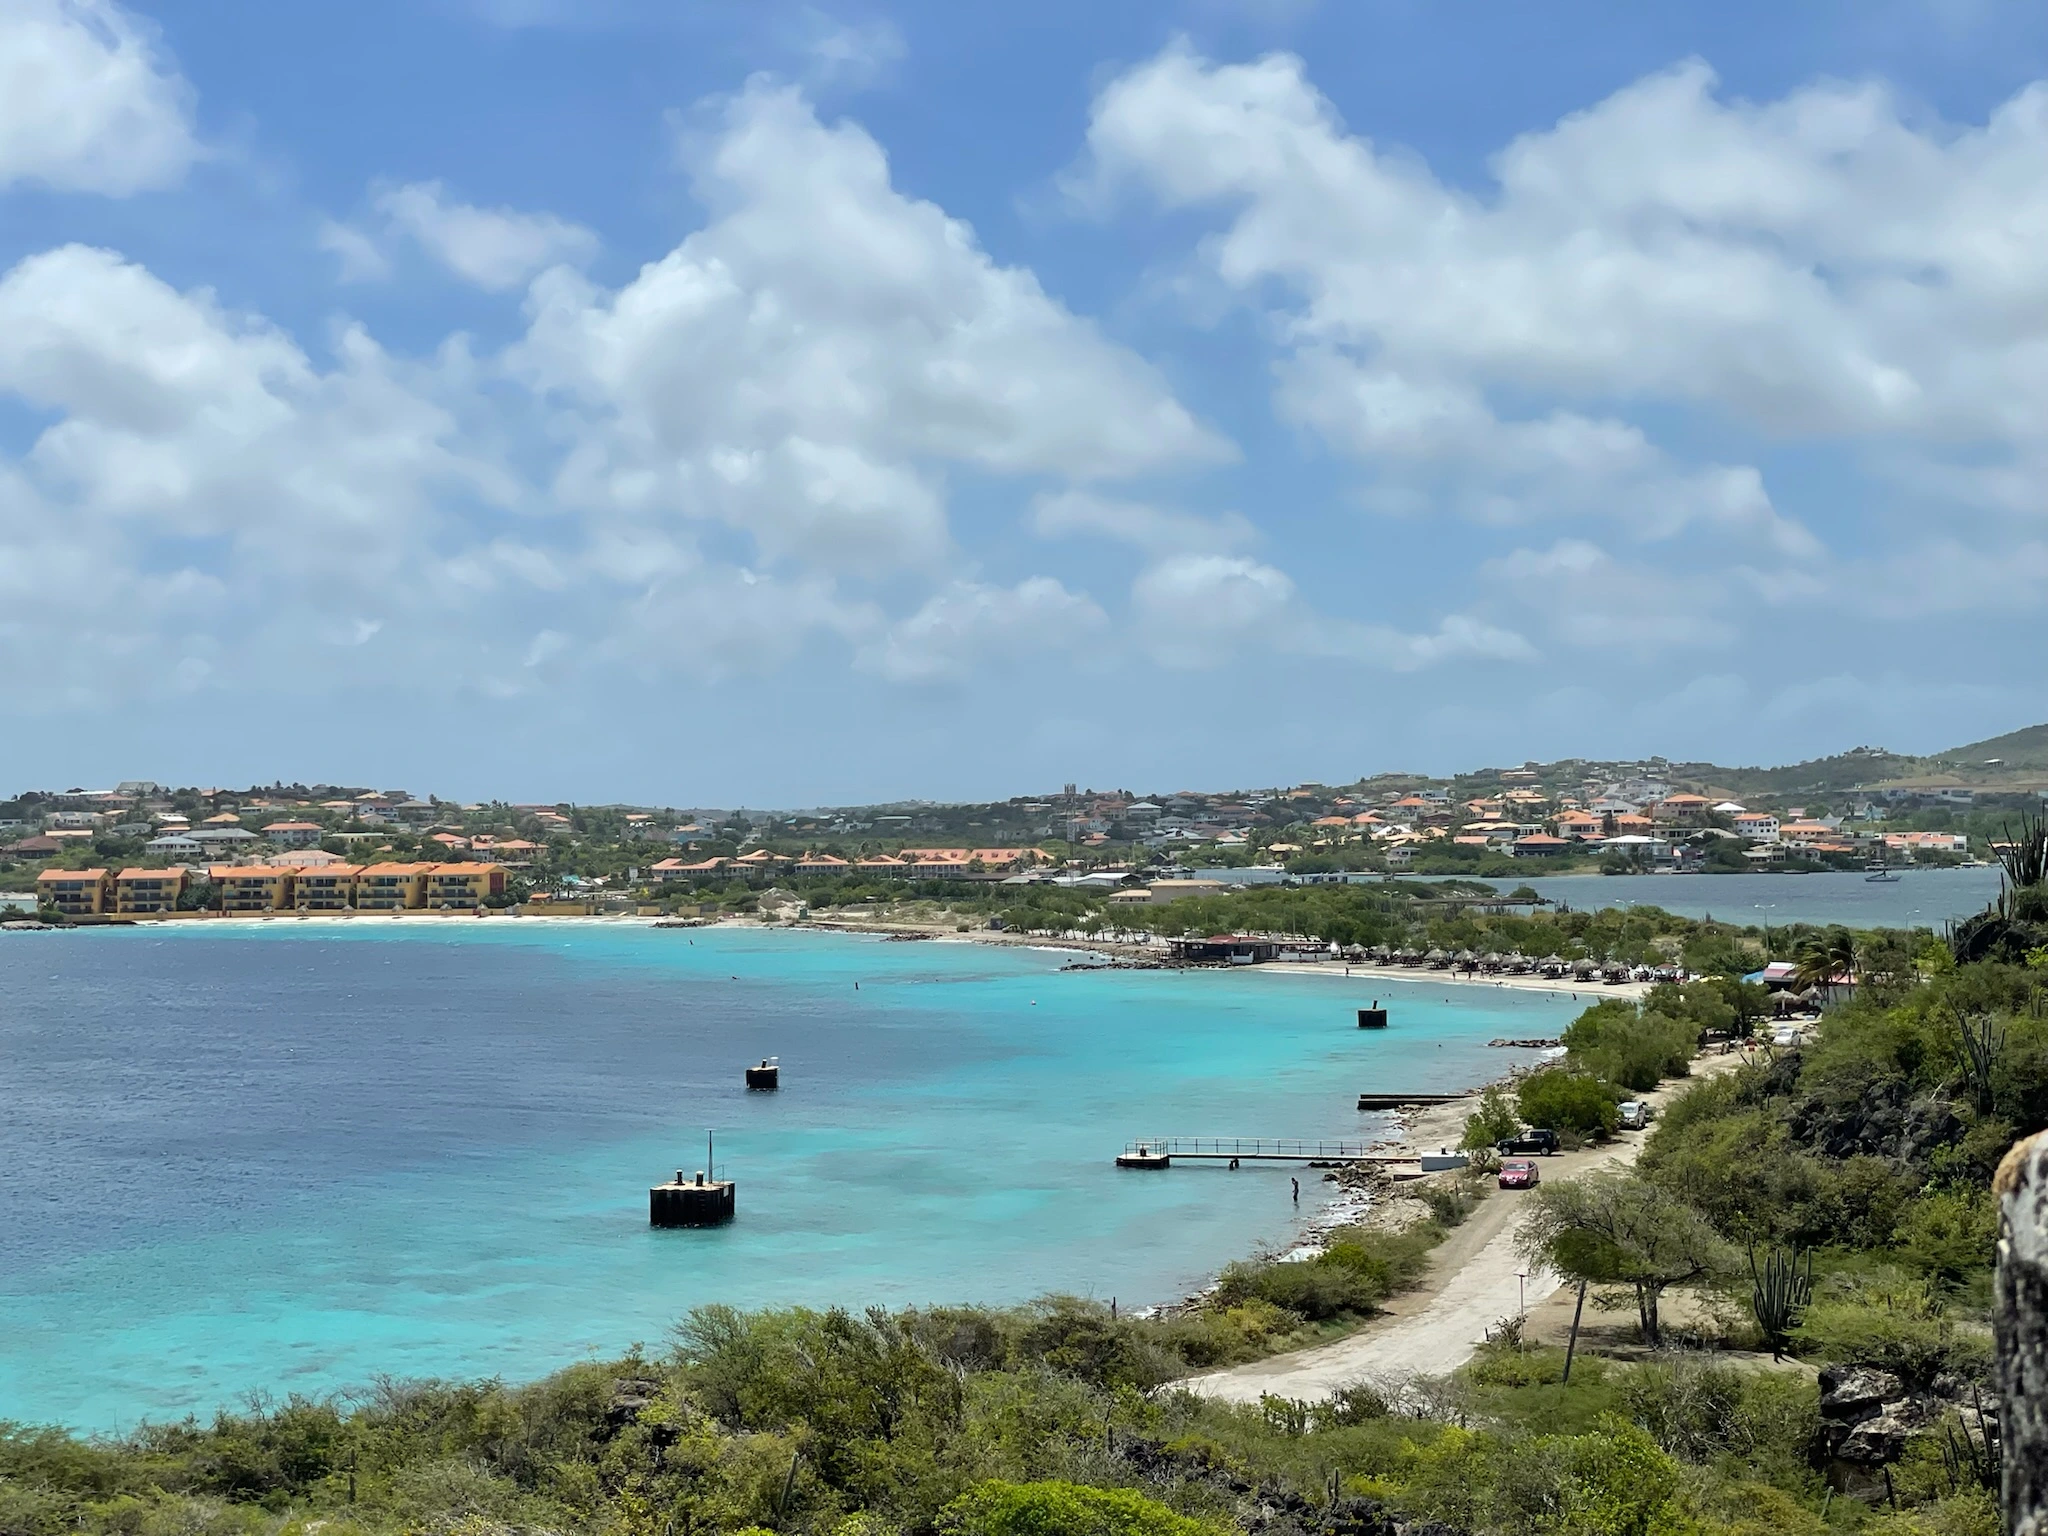 Reasons why you should visit Curaçao